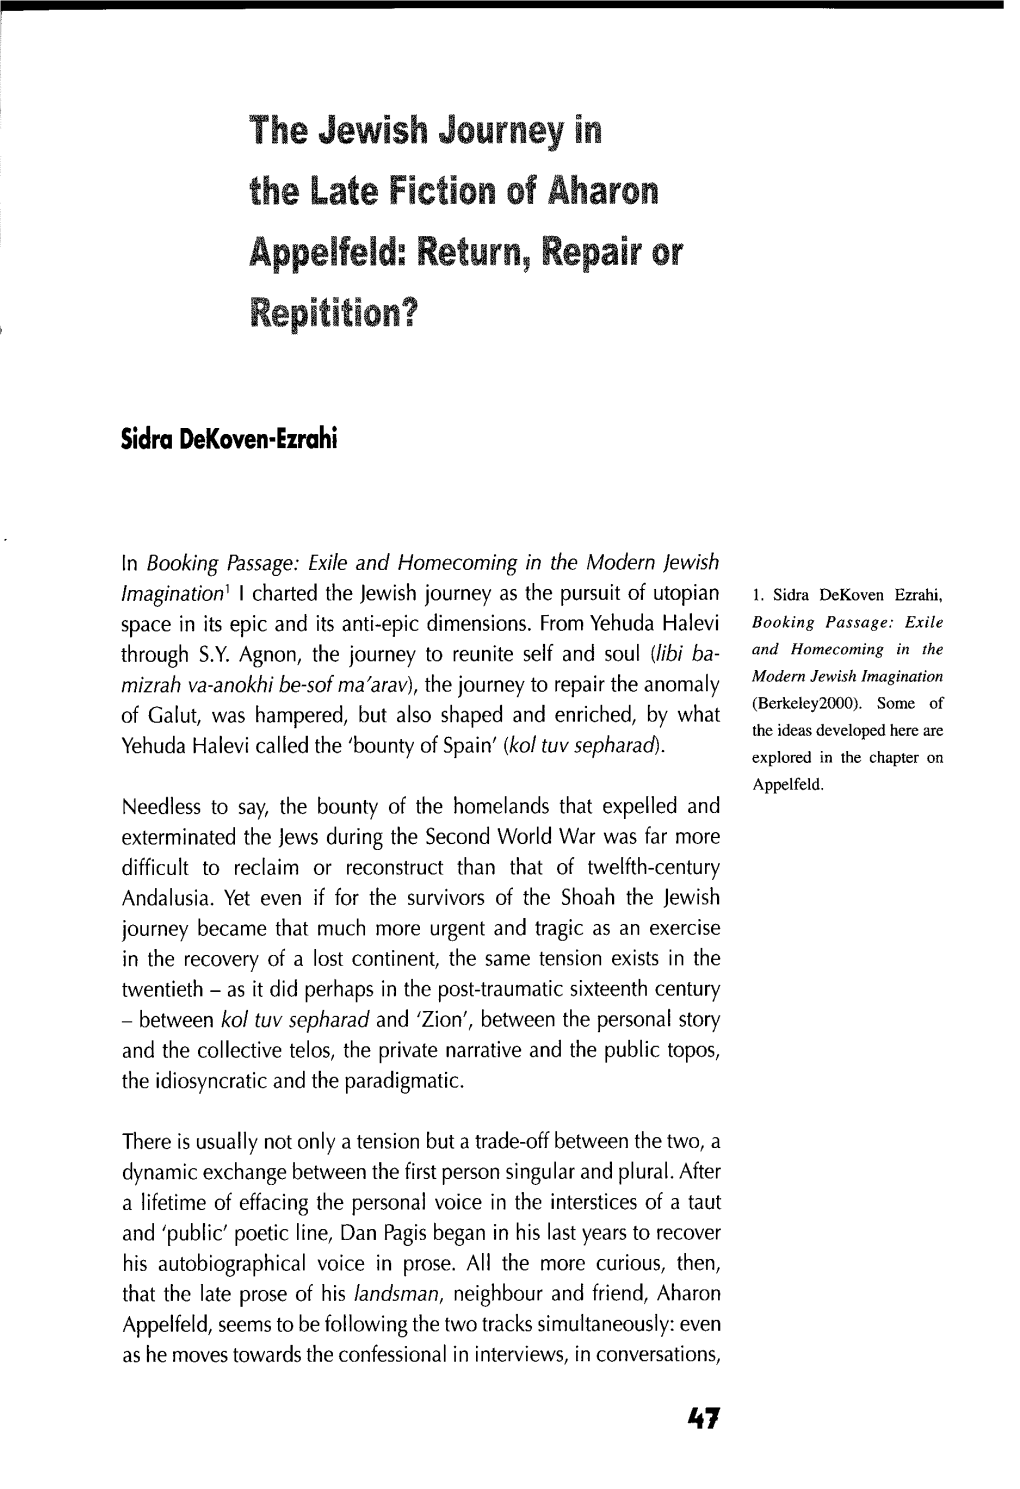 The Jewish Journey in the Late Fiction of Aharon Appelfeld: Return, Repair Or Repitition?